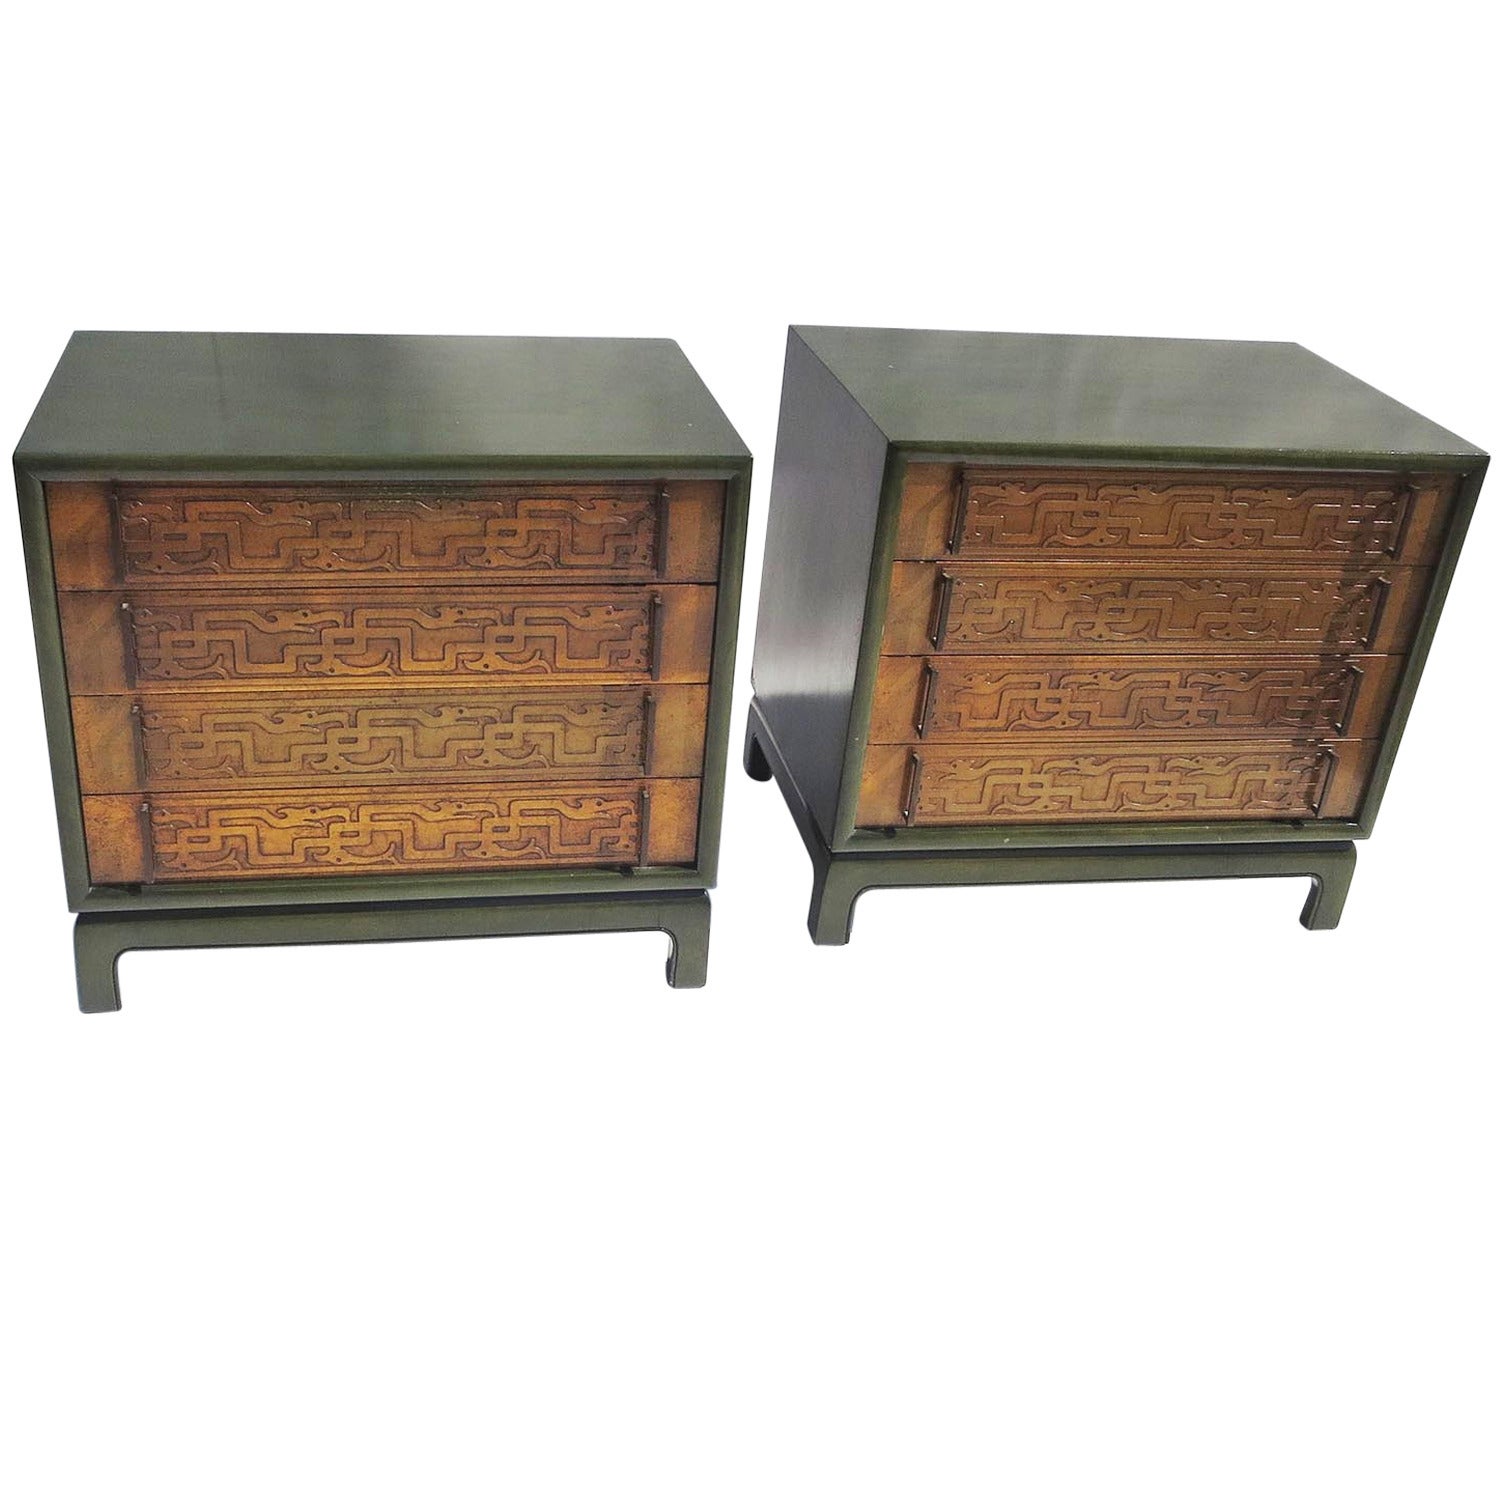 Mid-Century Asian Styled Dressers